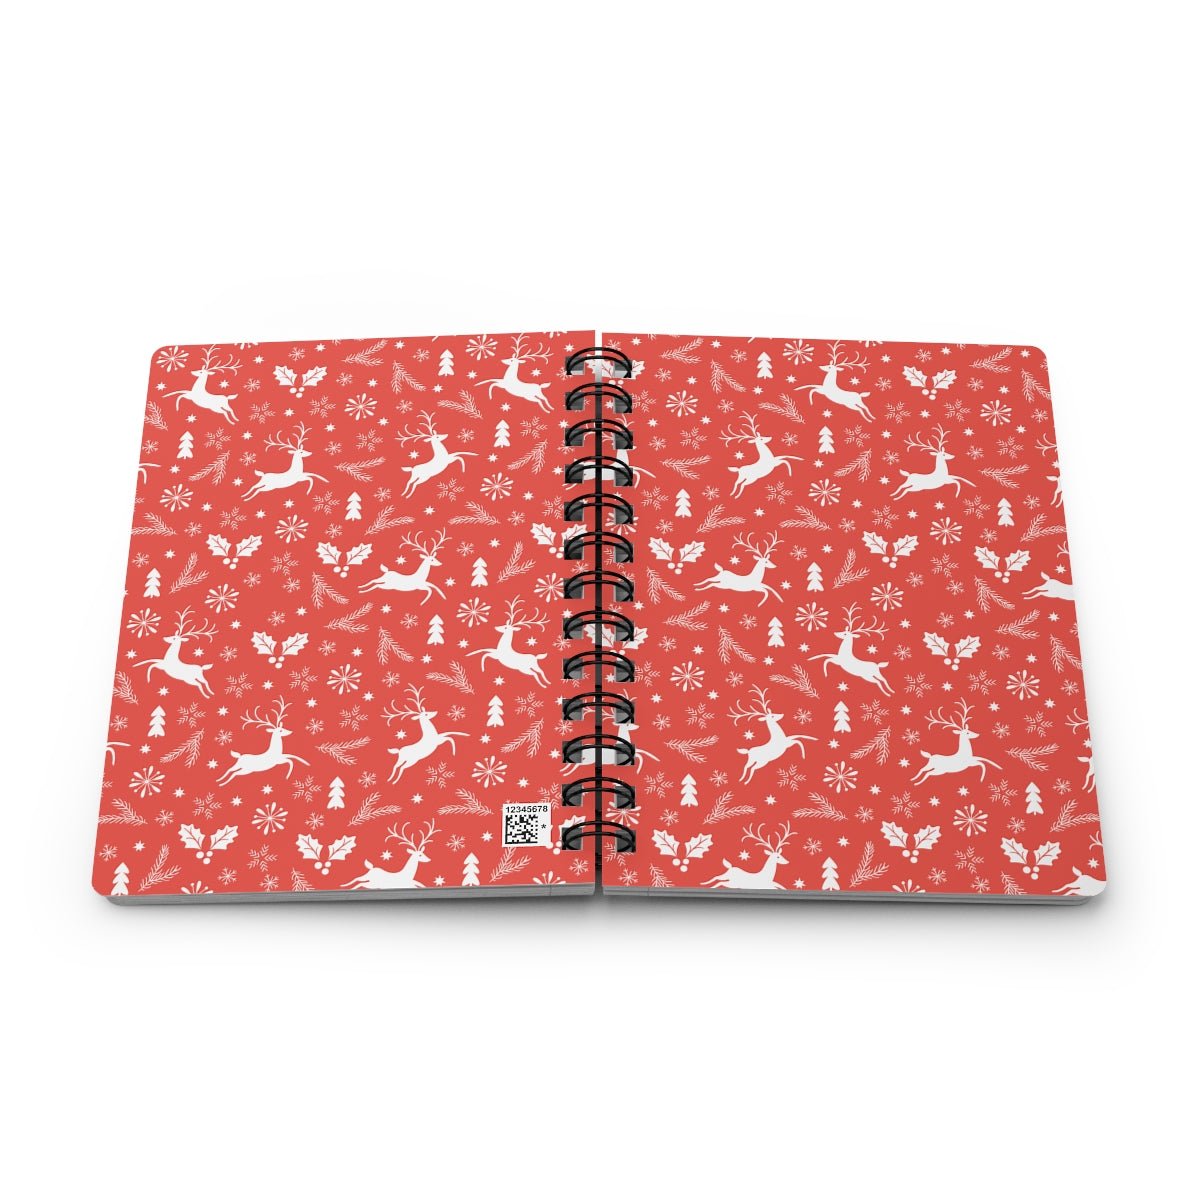 Christmas Reindeers Spiral Bound Journal - Puffin Lime